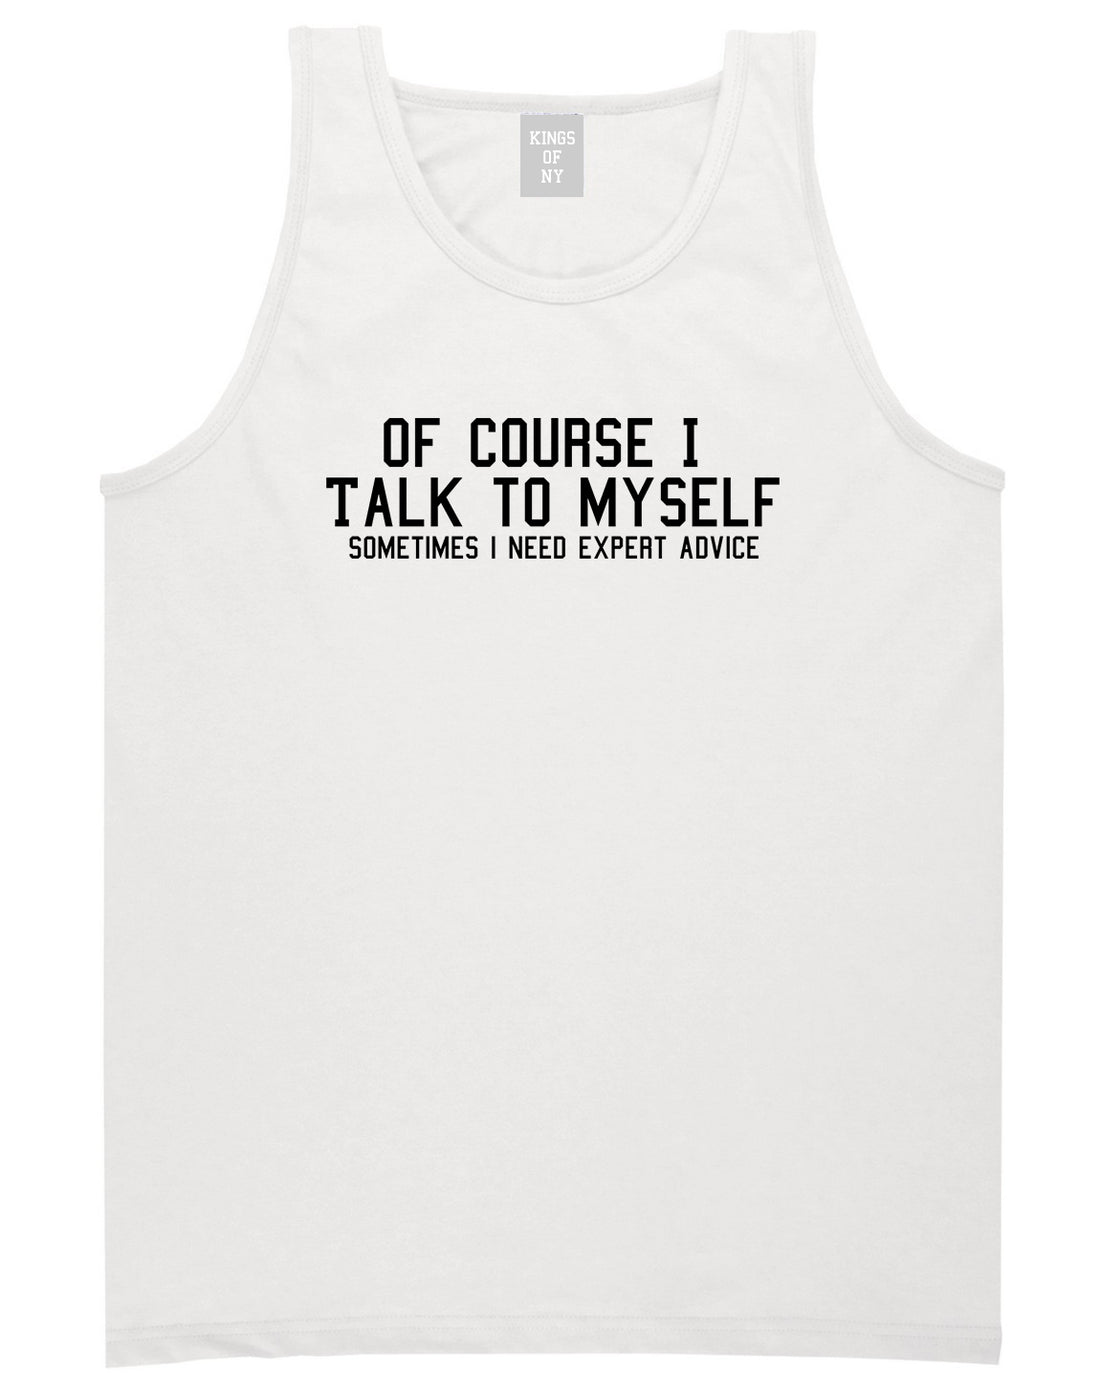 Of Course I Talk To Myself Funny Sarcasm Mens Tank Top T-Shirt White